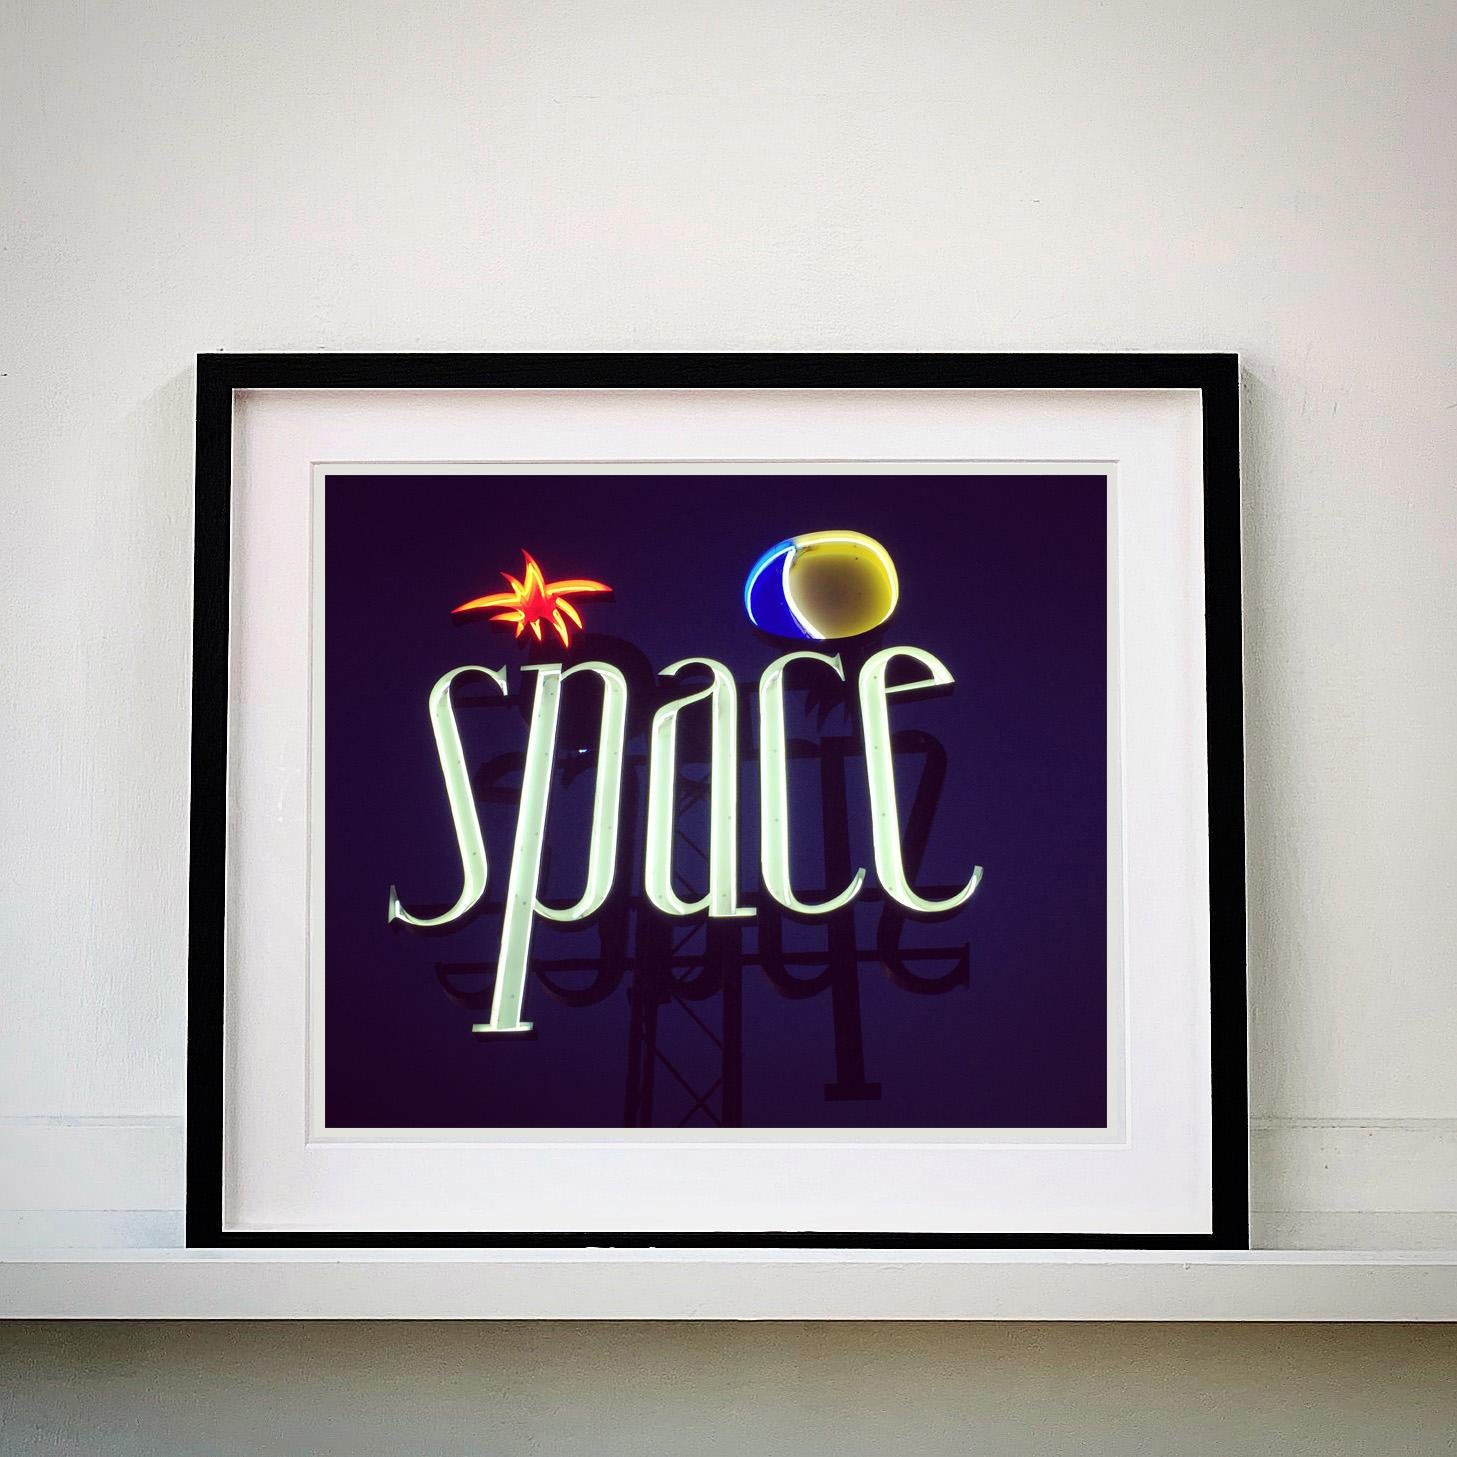 Space, Ibiza, the Balearic Islands - Contemporary Color Sign Photography - Black Color Photograph by Richard Heeps